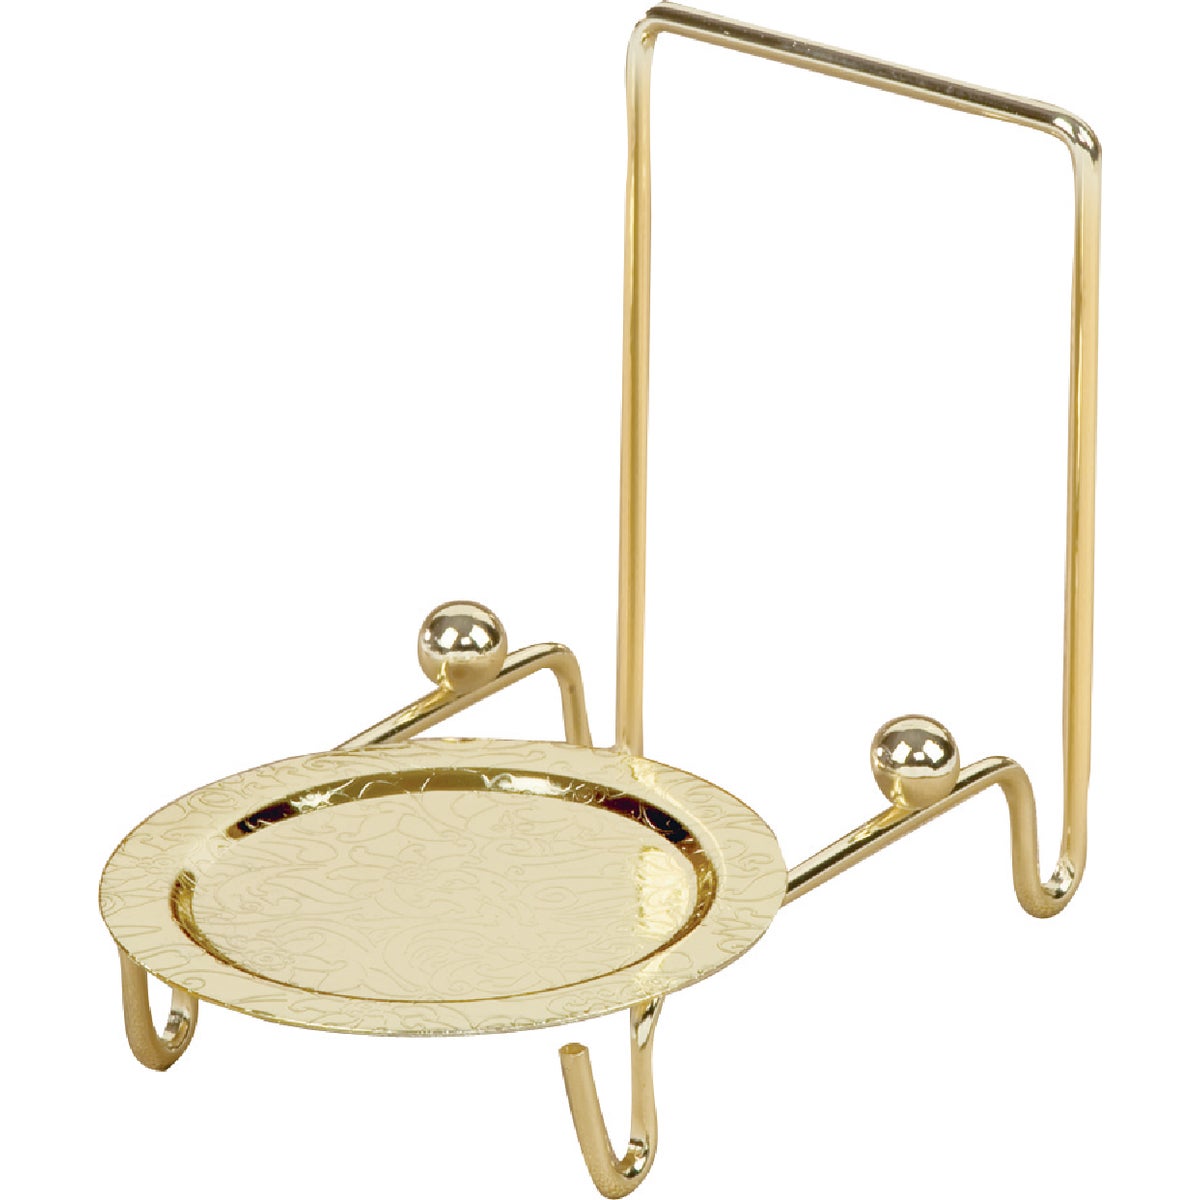 Item 638080, Brass cup and saucer stand featuring an elegant etched design.